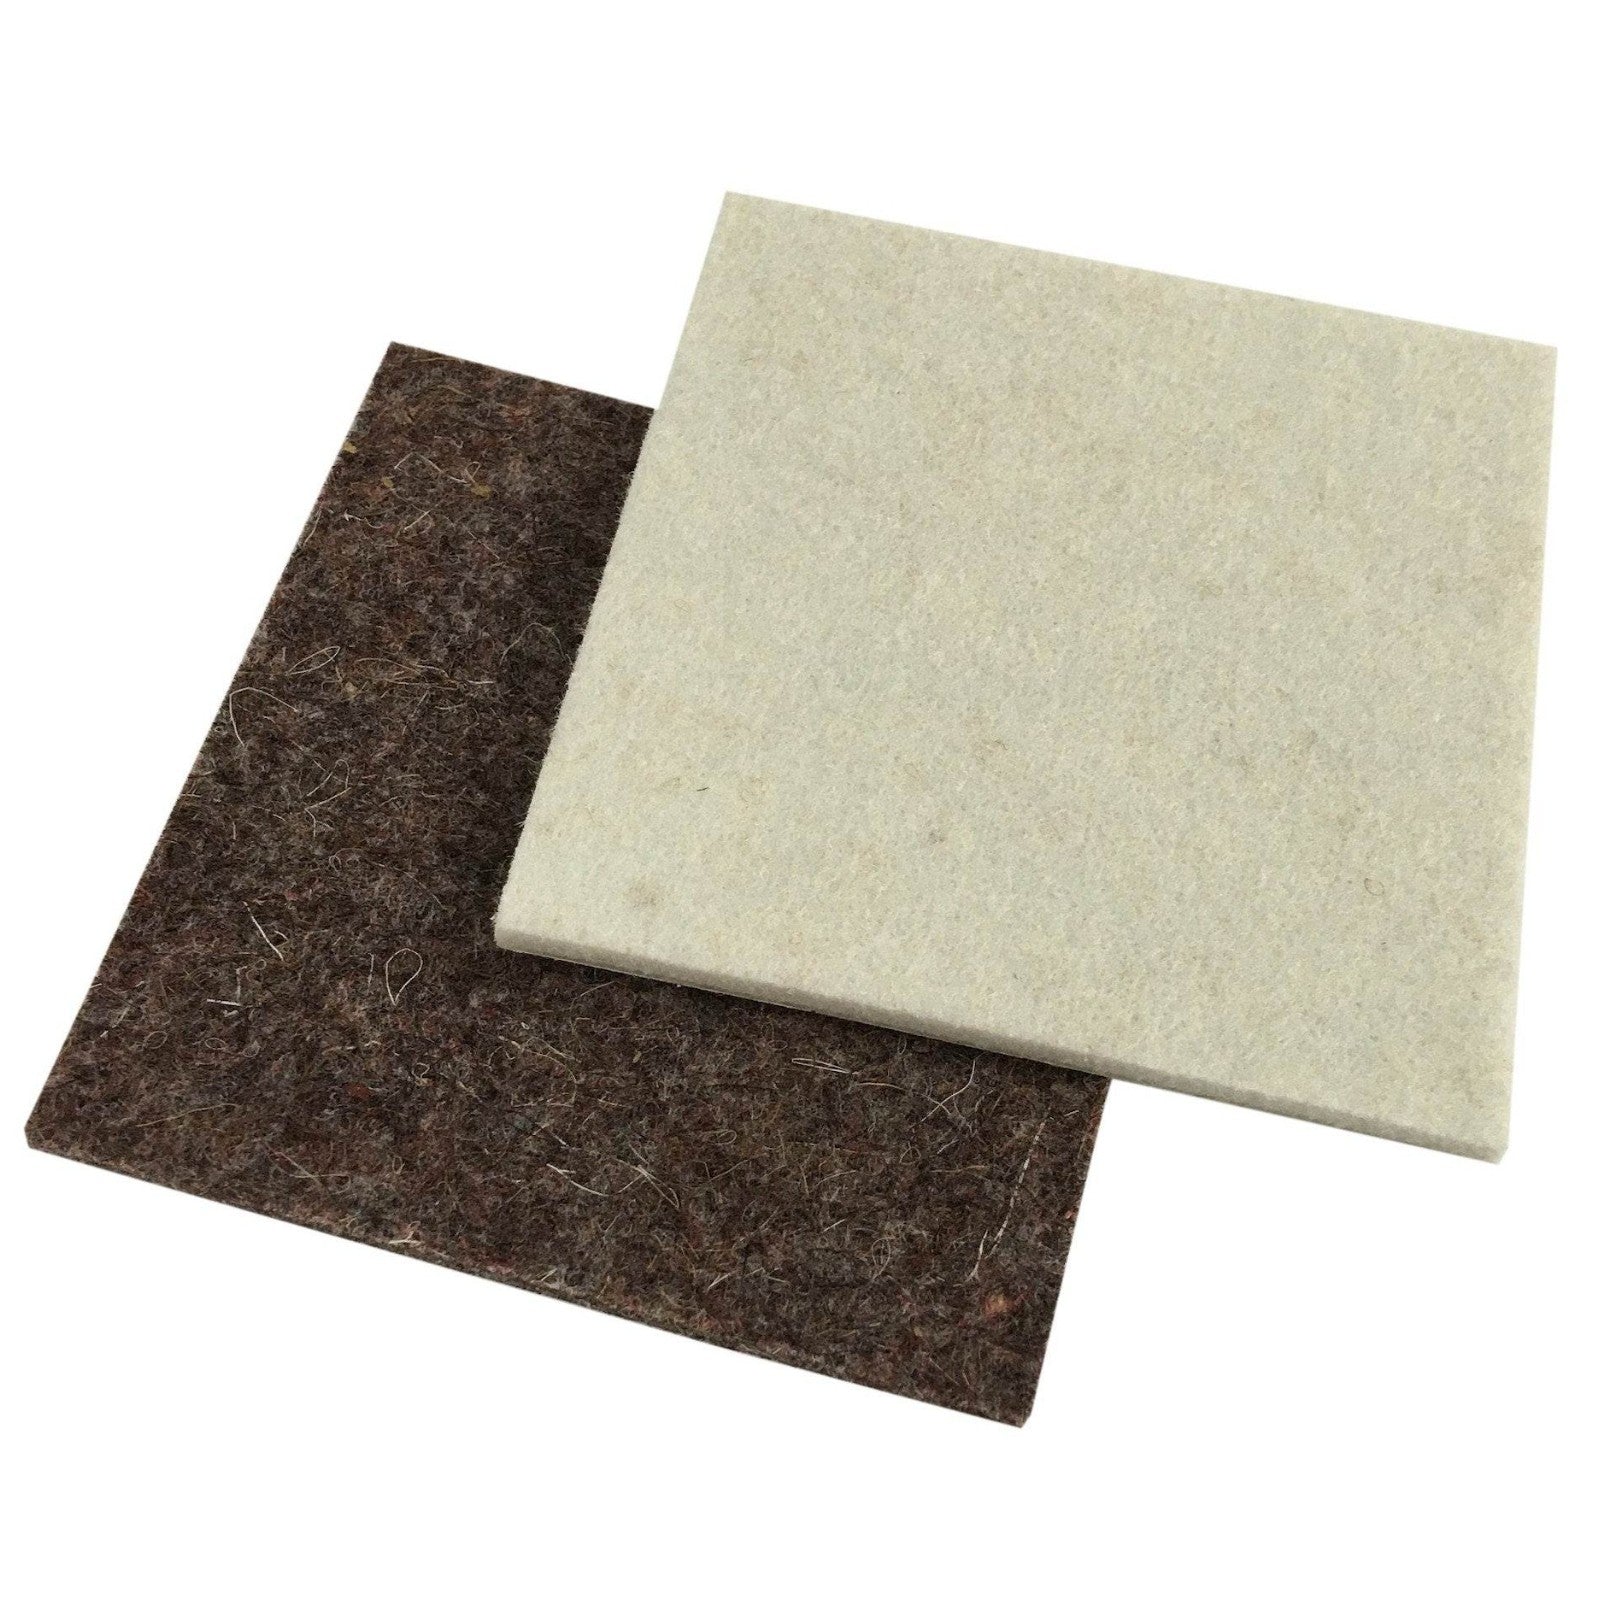 The Advantages of High-Density Wool Blend Felt for Floor Protection